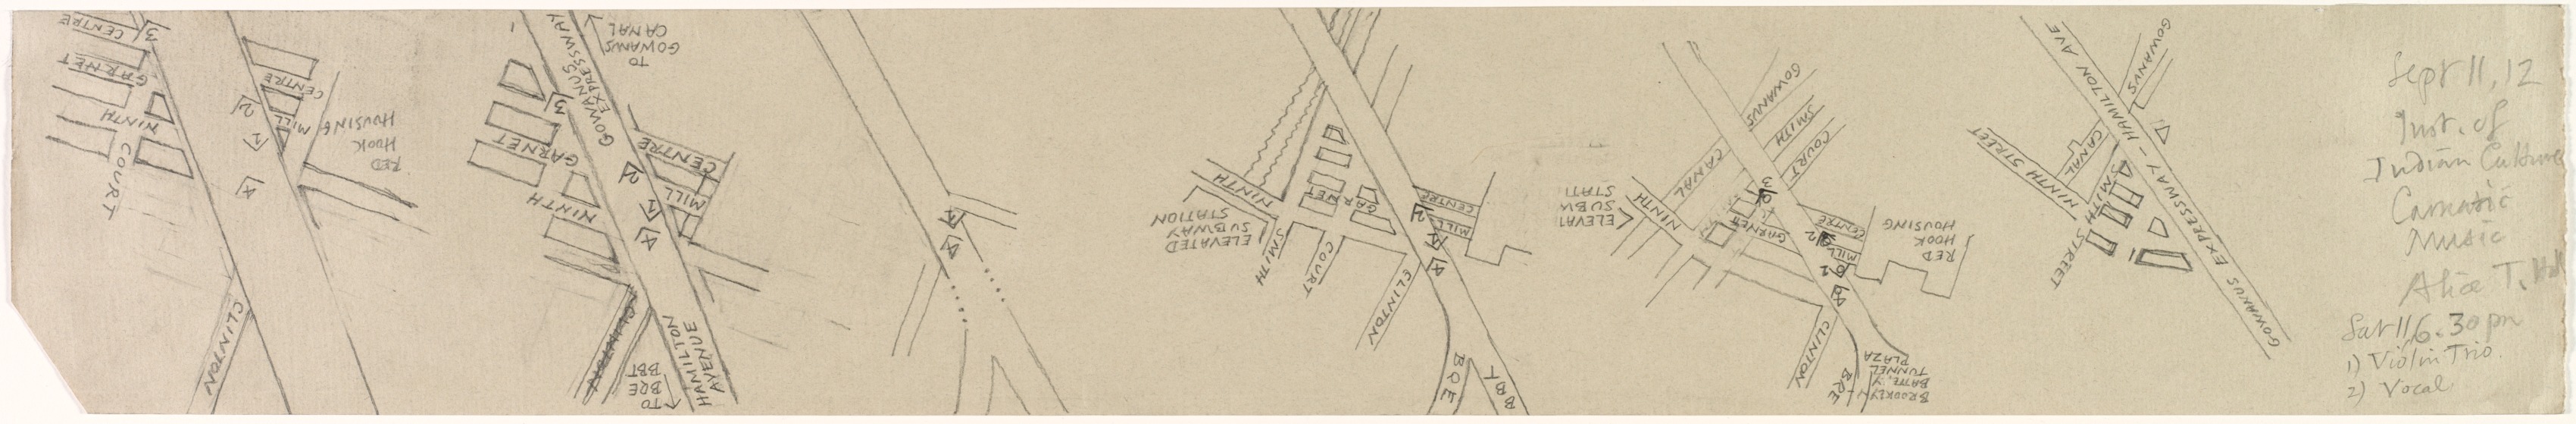 A Page of maps showing where the artist stood while working on the four partsof "Under the Gowanus on Hamilton Avenue"